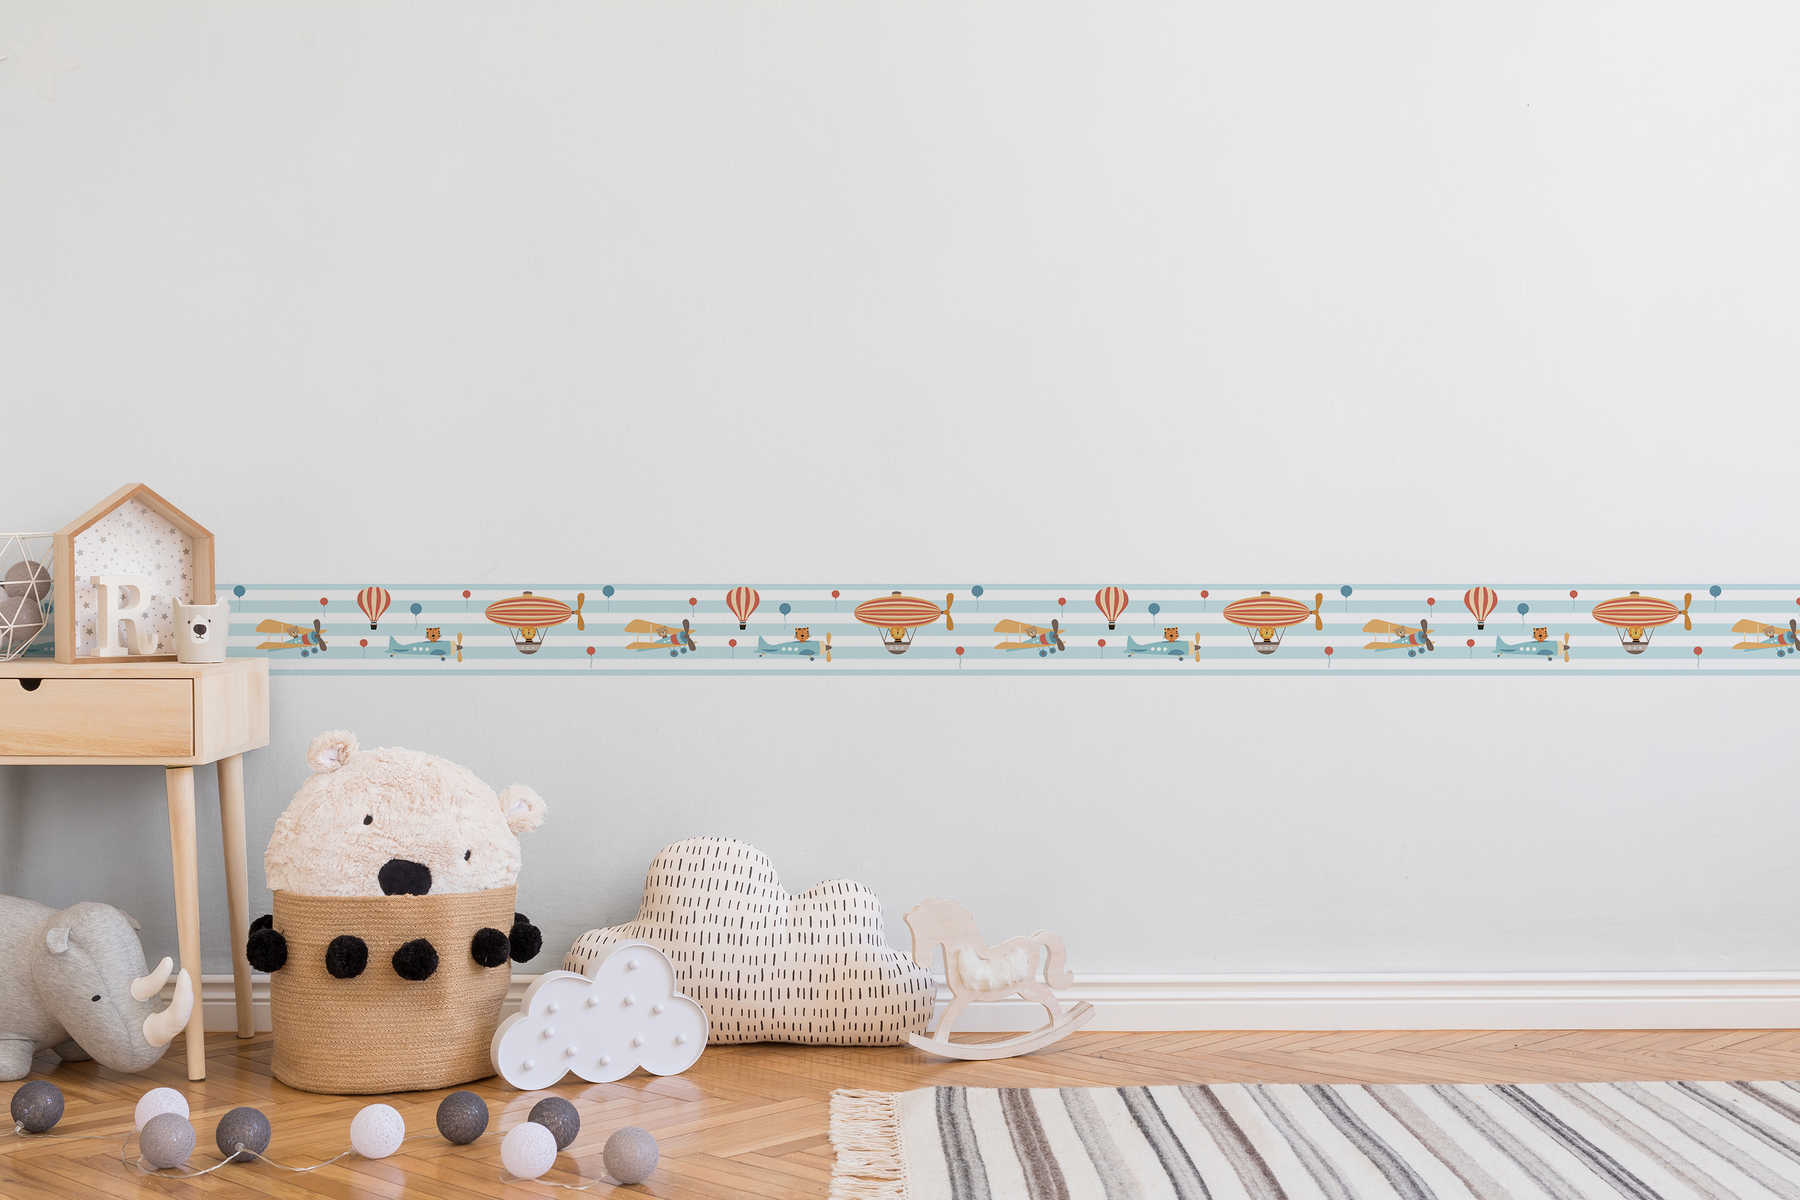             Self-adhesive baby room border "Into the air!" - Orange, Blue, Red
        